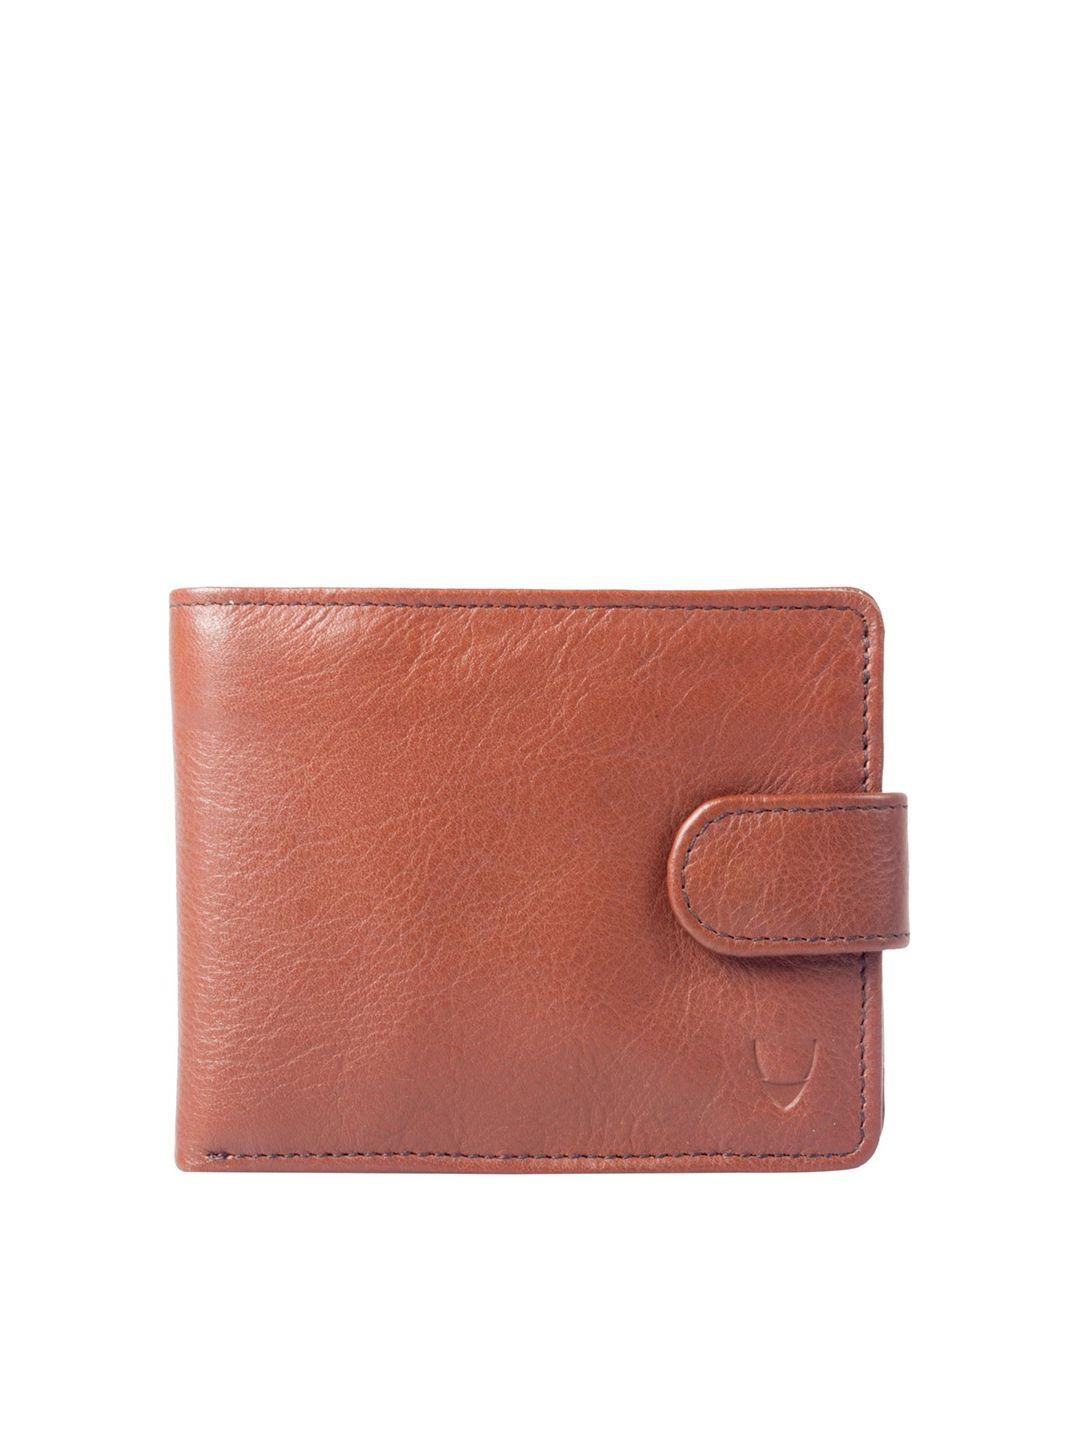 hidesign men tan textured leather two fold wallet